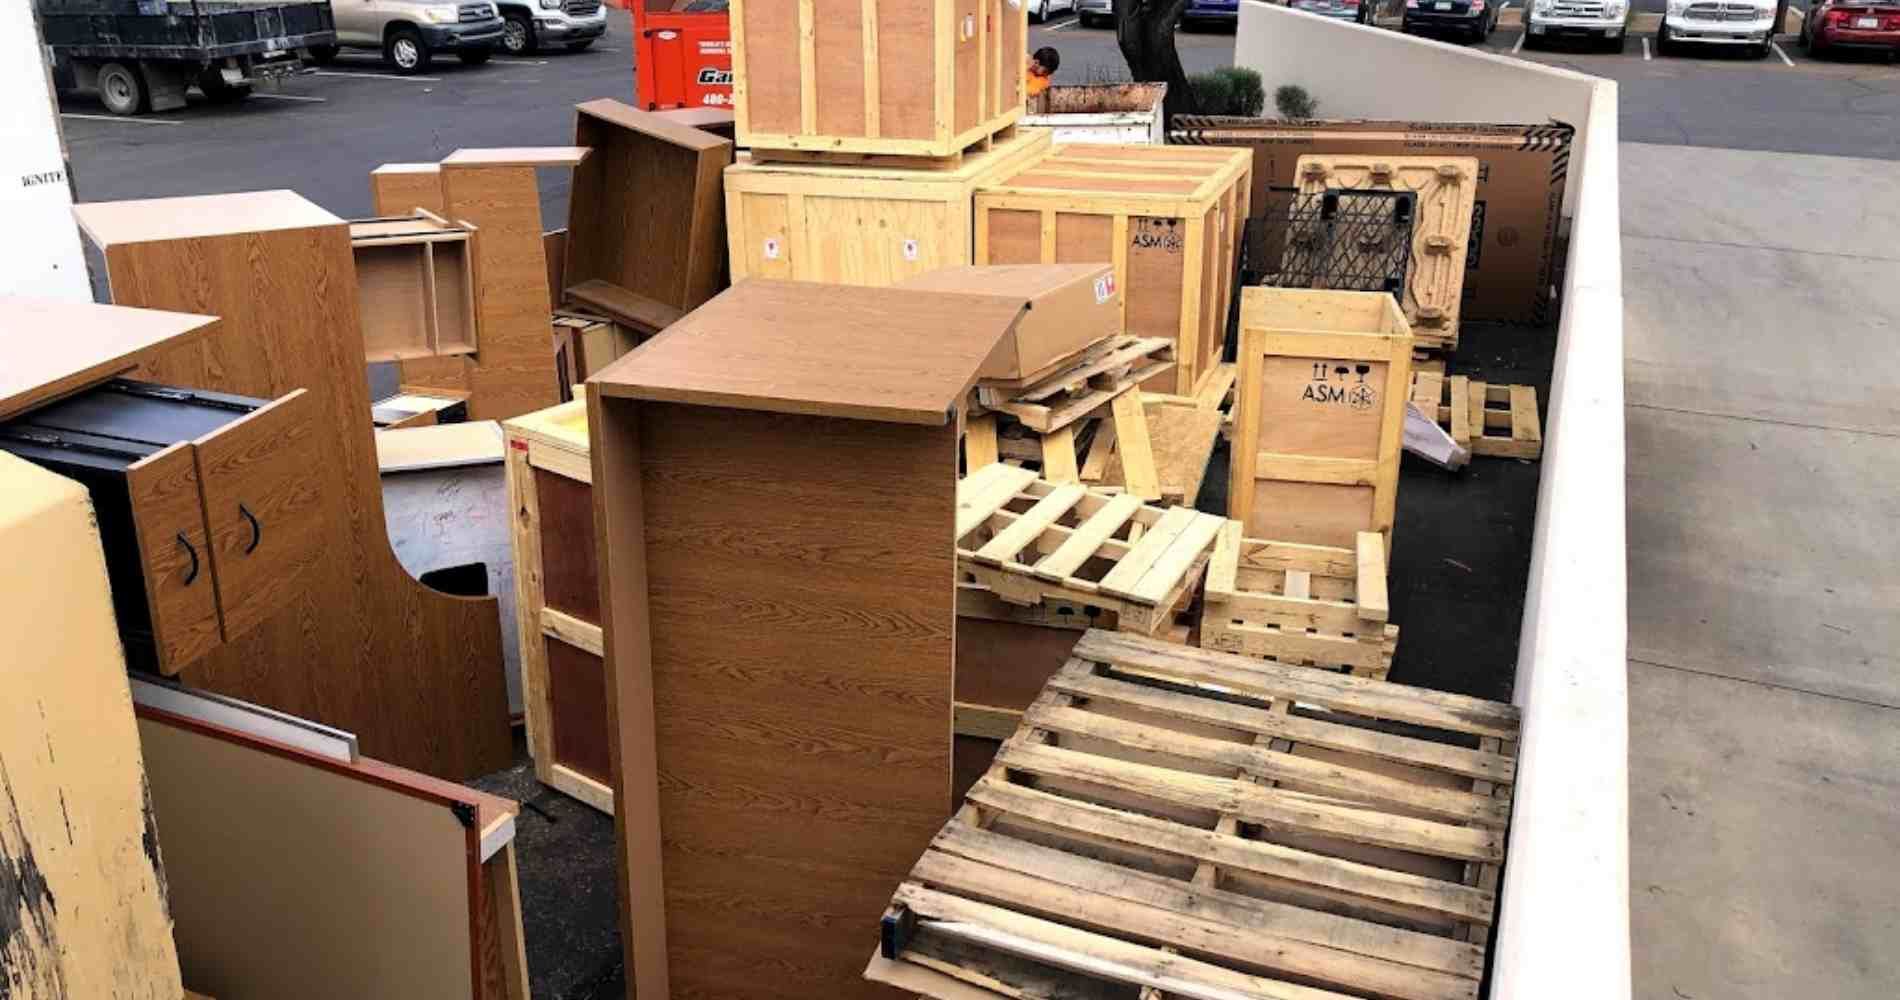 #1 for Pallet Disposal in Tempe, AZ With Over 1200 5-Star Reviews!